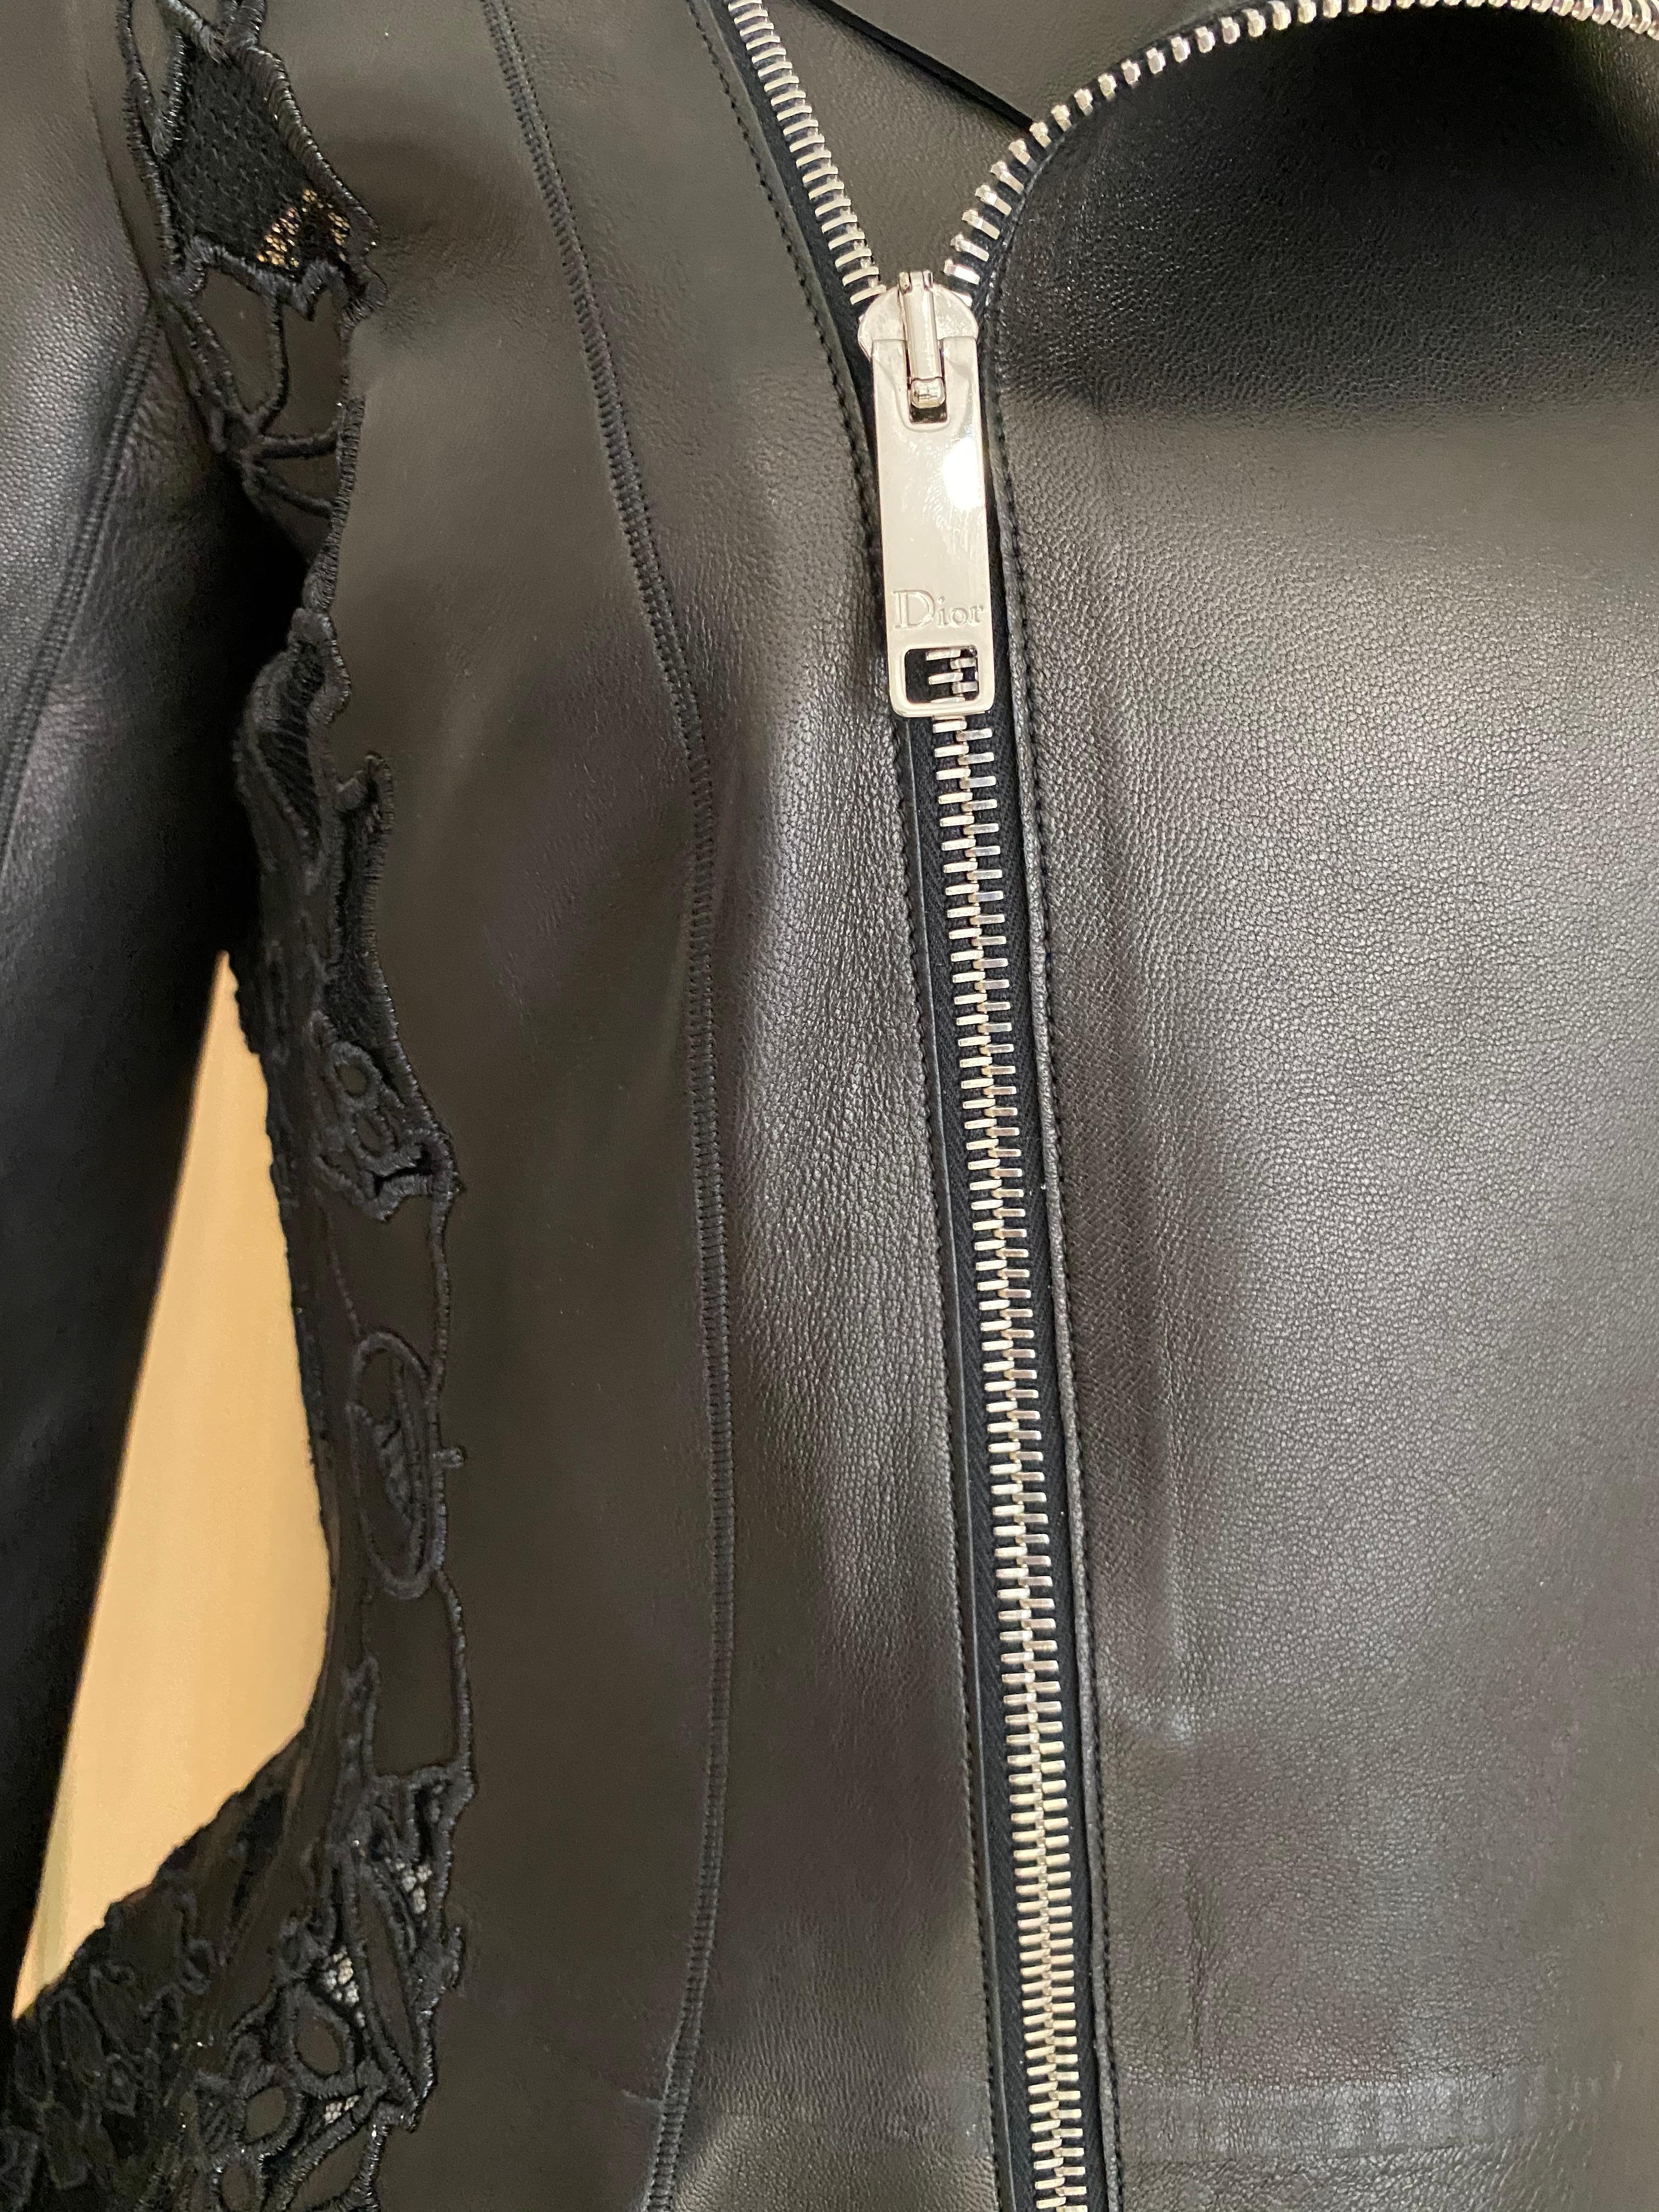 Christian Dior Black Leather Peplum Jacket with Lace  For Sale 3